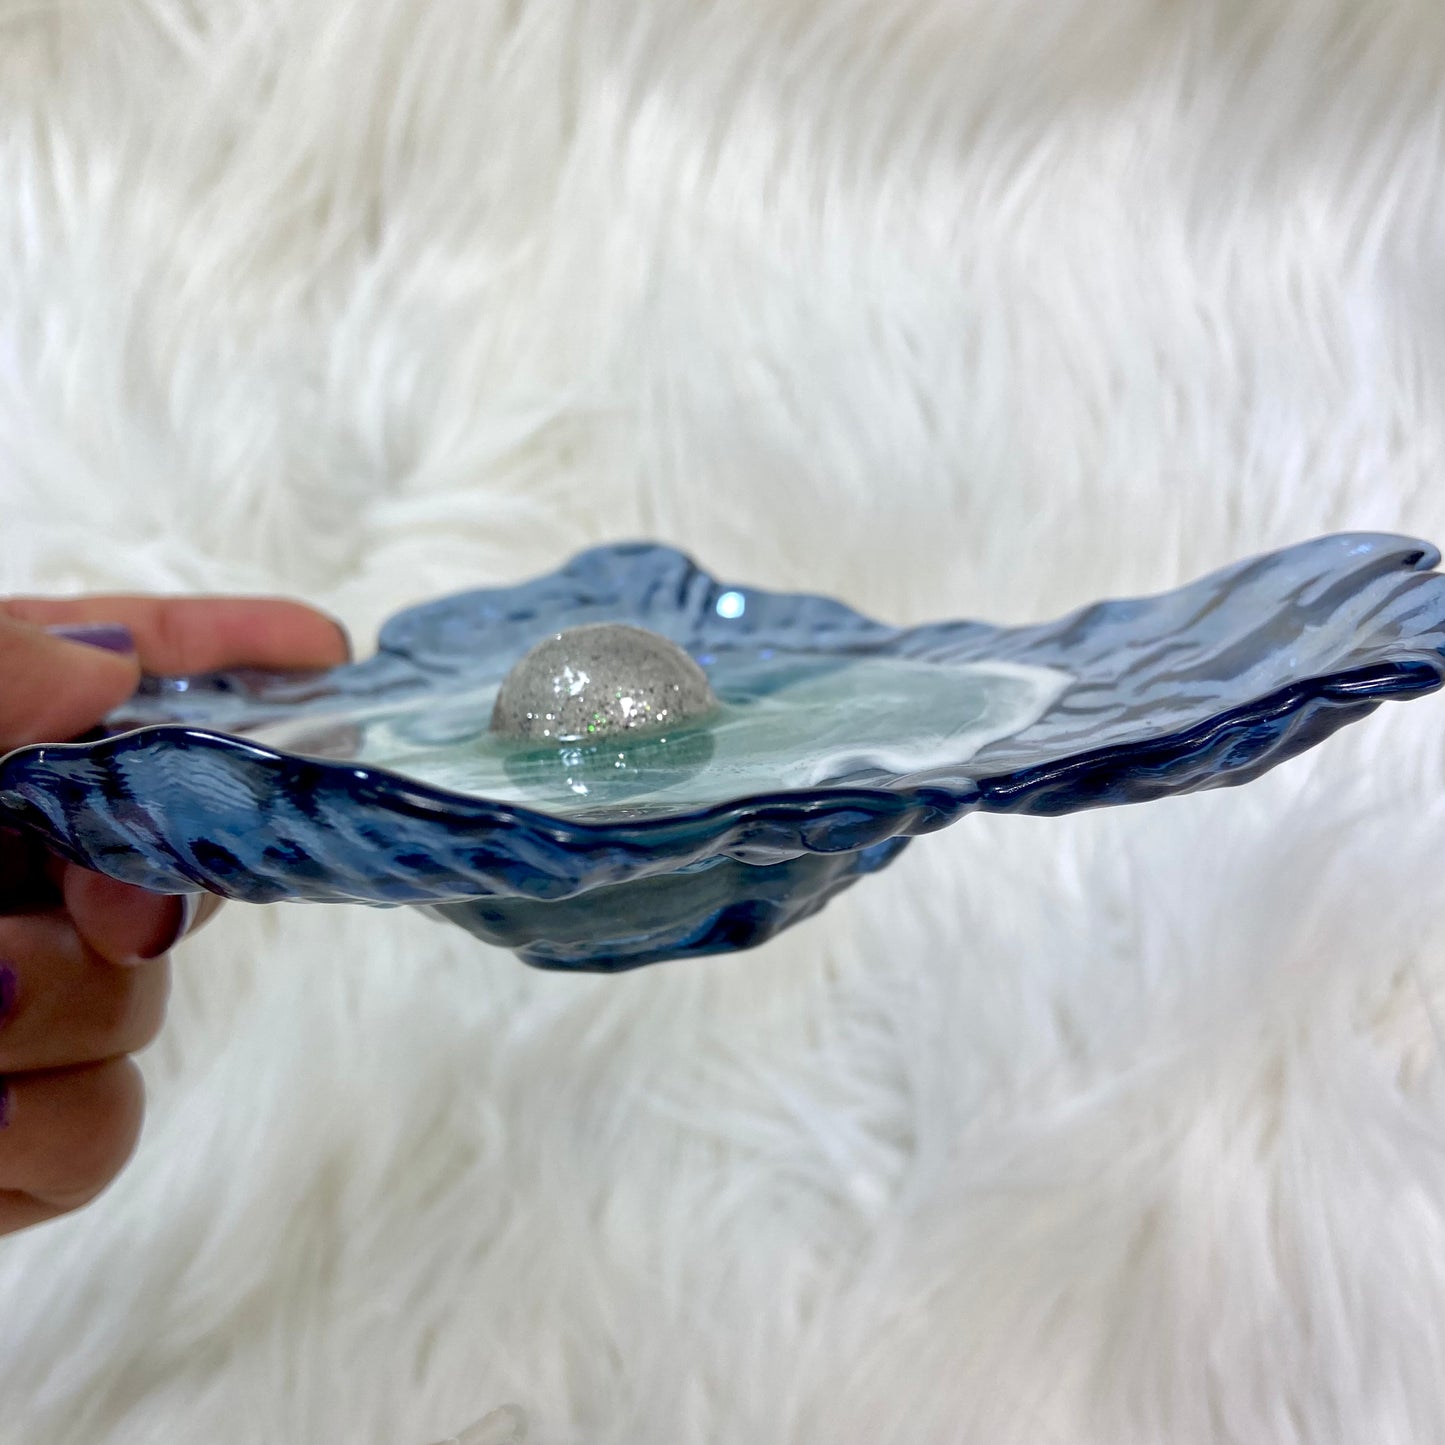 Ocean Wave Oyster Glass Dish with Faux Pearl